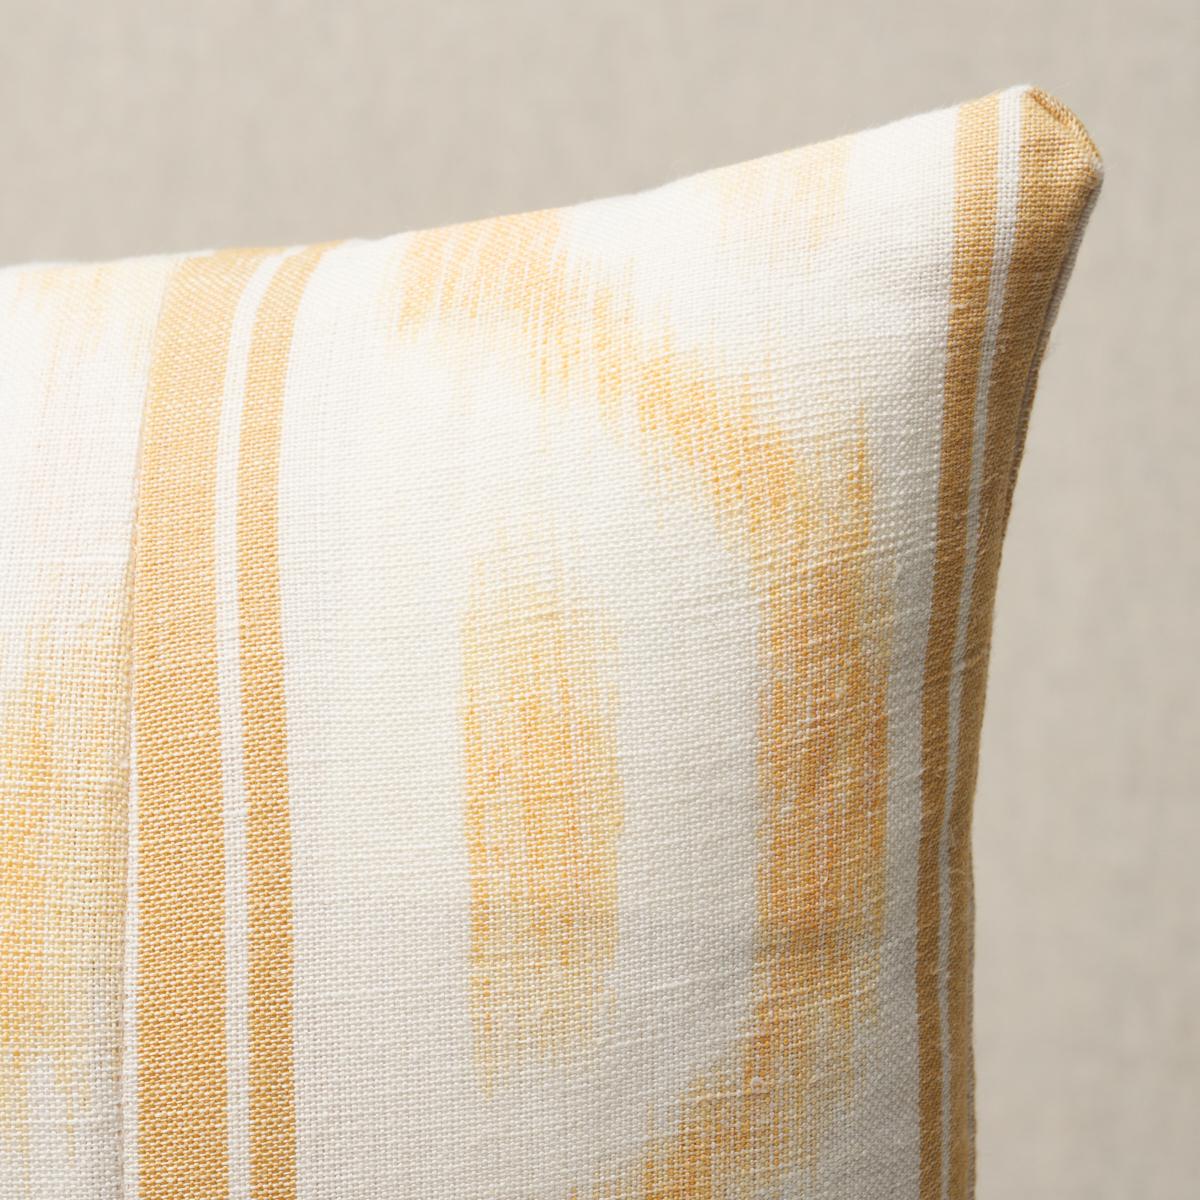 This pillow features Santa Monica Ikat by Mark D. Sikes for Schumacher with a knife edge finish. This artisanally crafted pattern in yellow puts a fresh spin on an archival ikat. Pillow includes a feather/down fill insert and hidden zipper